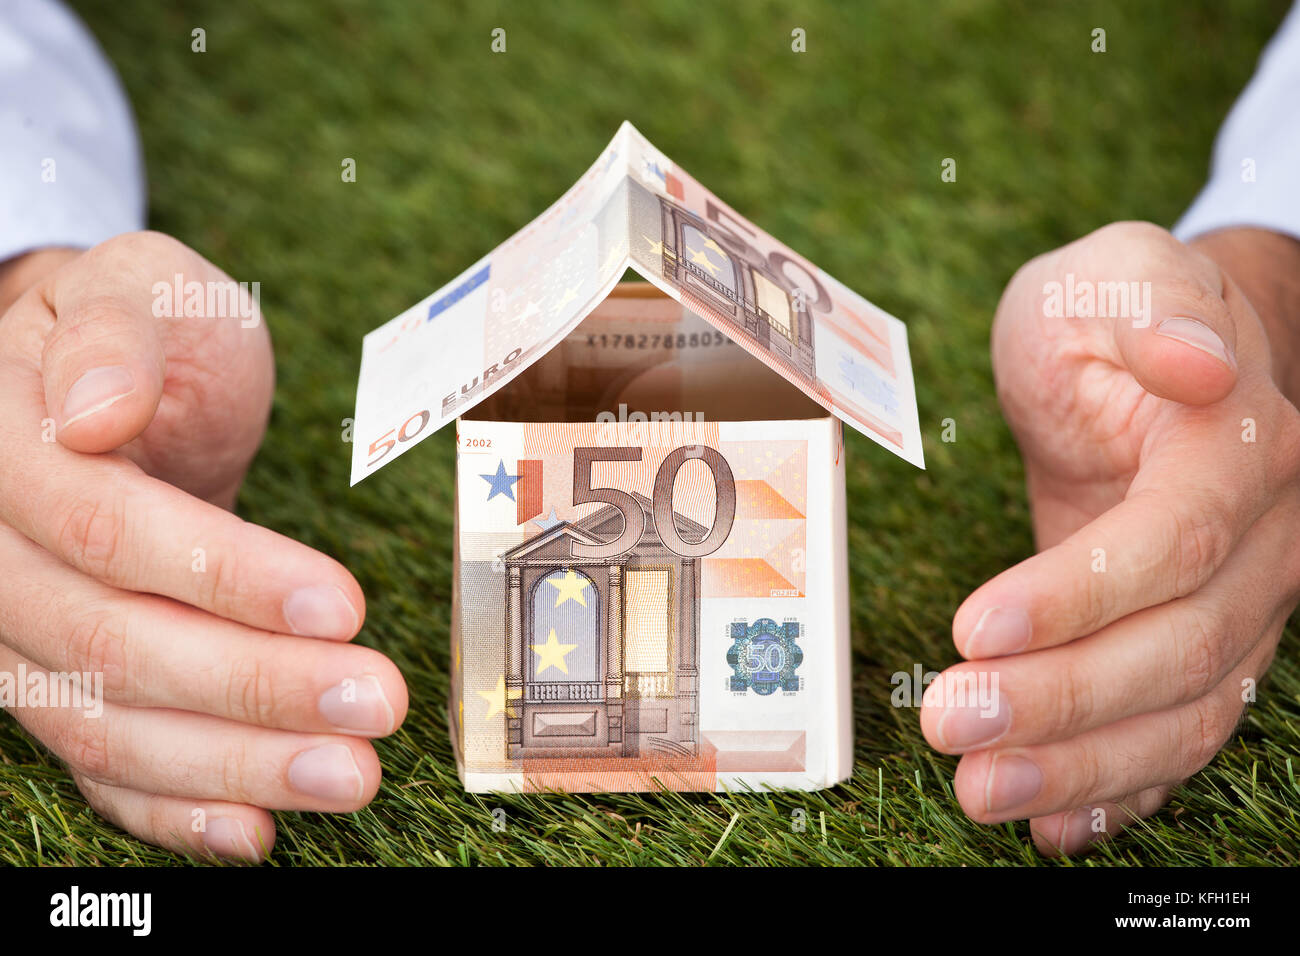 Businessman's hands protecting house made of euro notes on grassy land Stock Photo